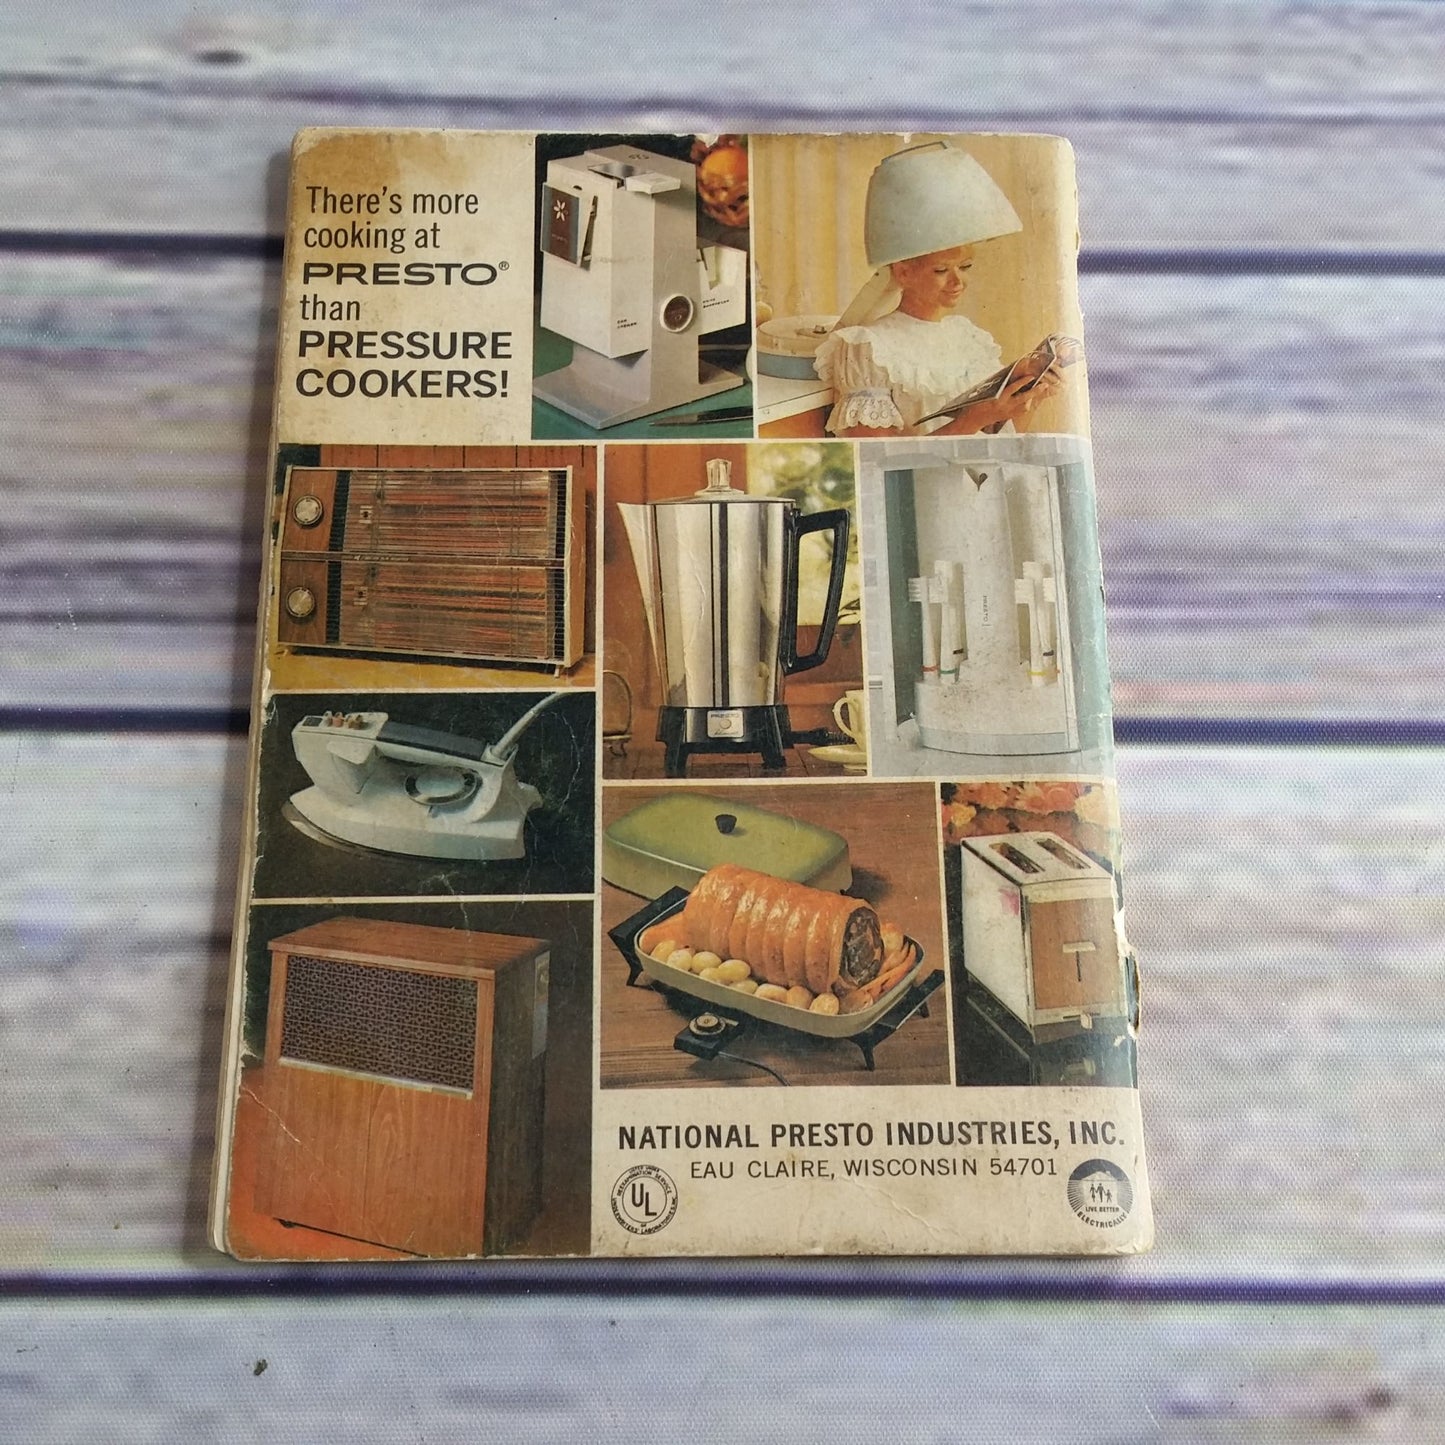 Vintage Cookbook Presto Pressure Cooker Recipes and Instructions 1971 1970s Booklet Time Tables National Presto Industries